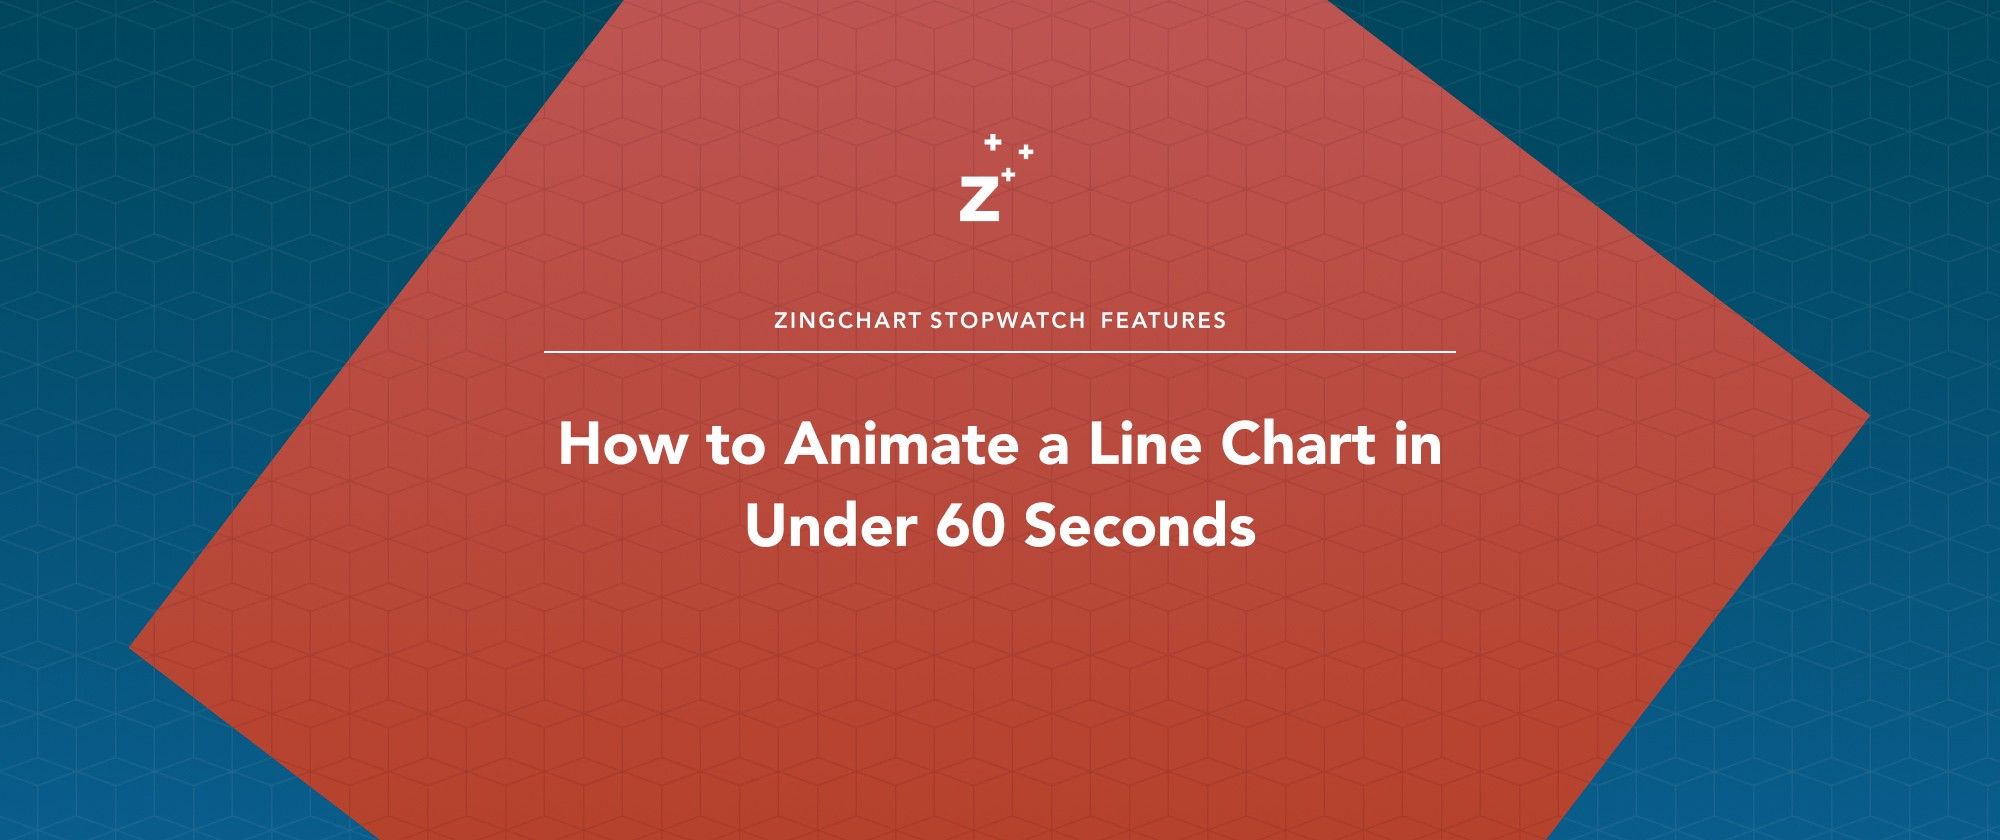 Cover image for "How to animate a line chart in under 60 seconds" blog post